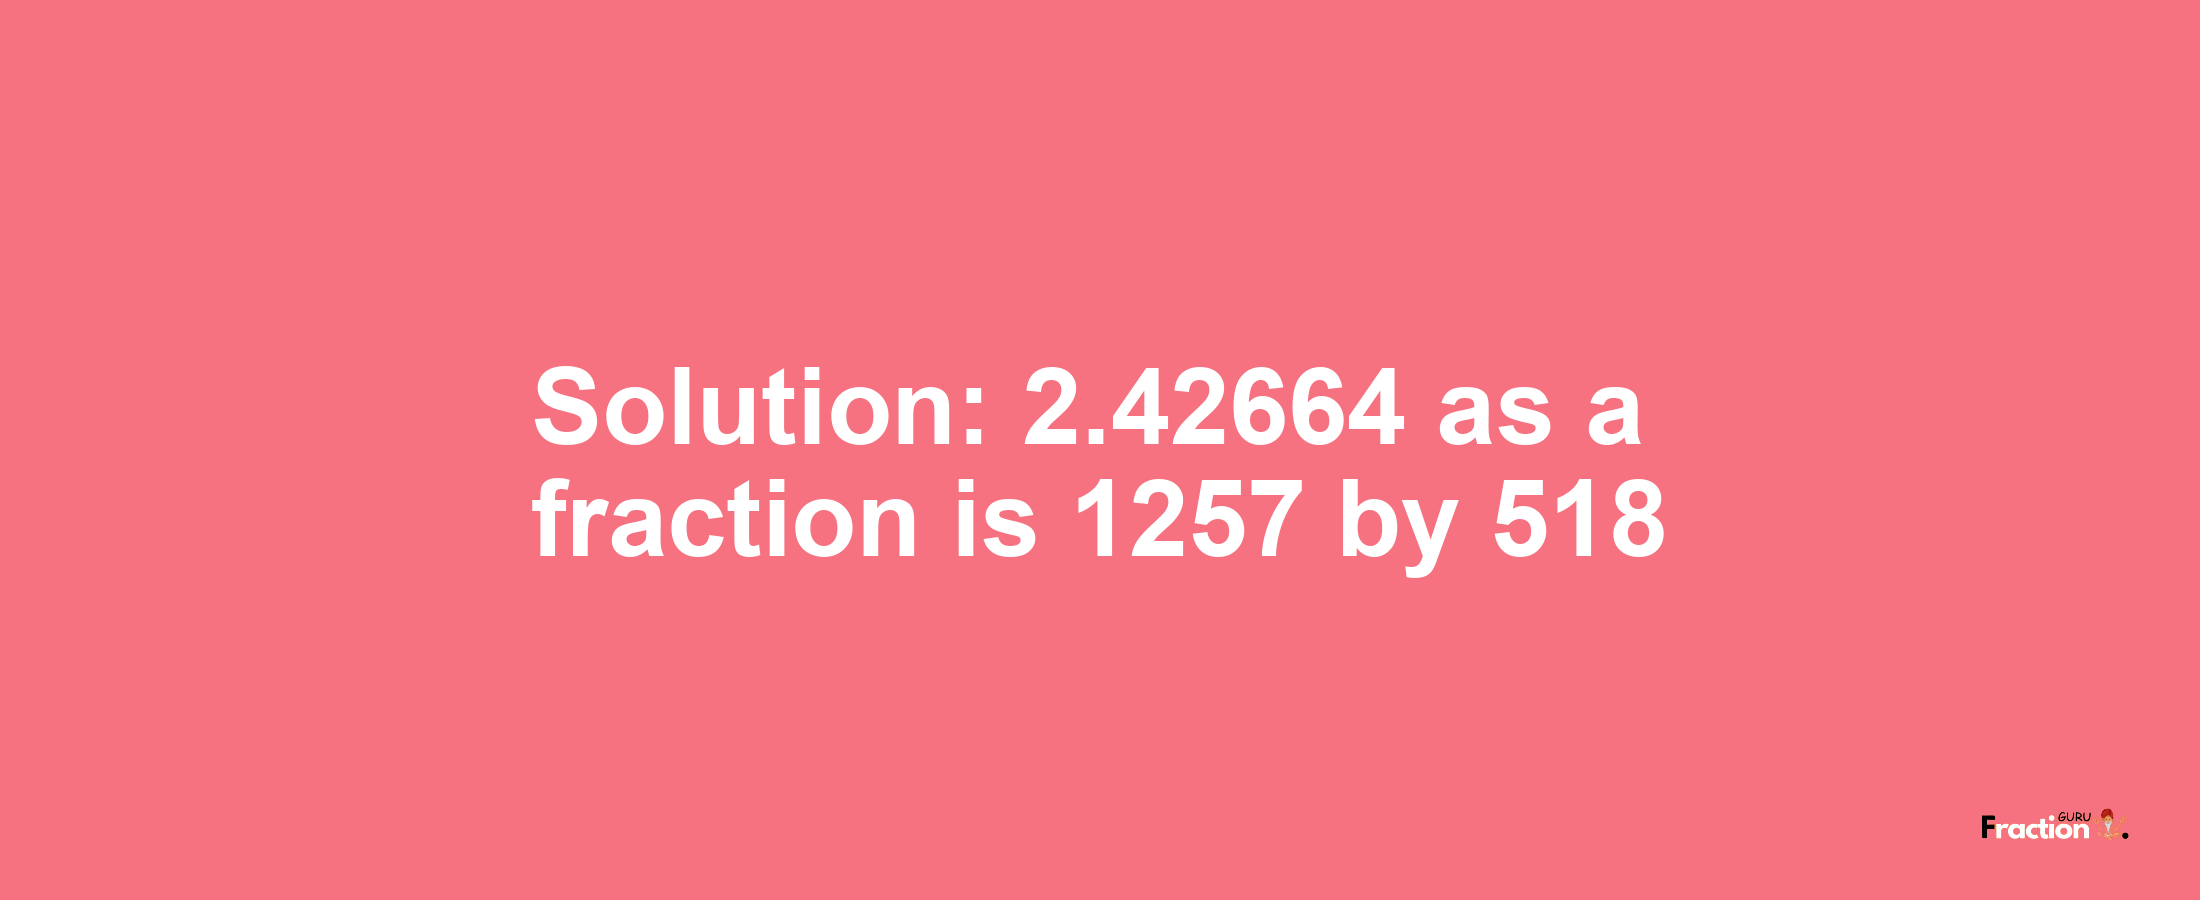 Solution:2.42664 as a fraction is 1257/518